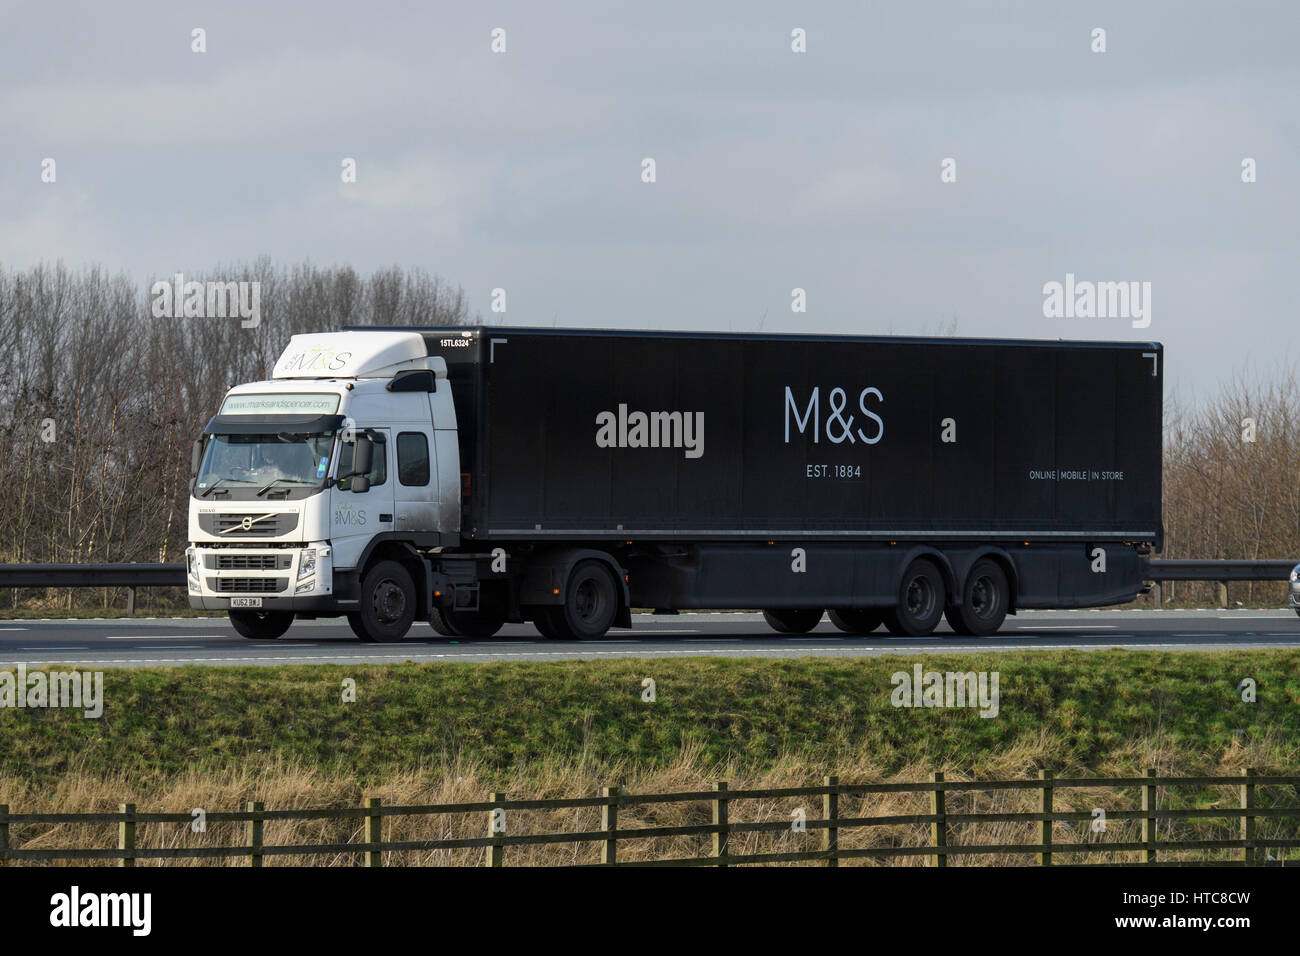 Distribution & transportation - articulated lorry, heavy goods vehicle (HGV) with M & S logo travels on the A1 motorway - England, GB, UK. Stock Photo